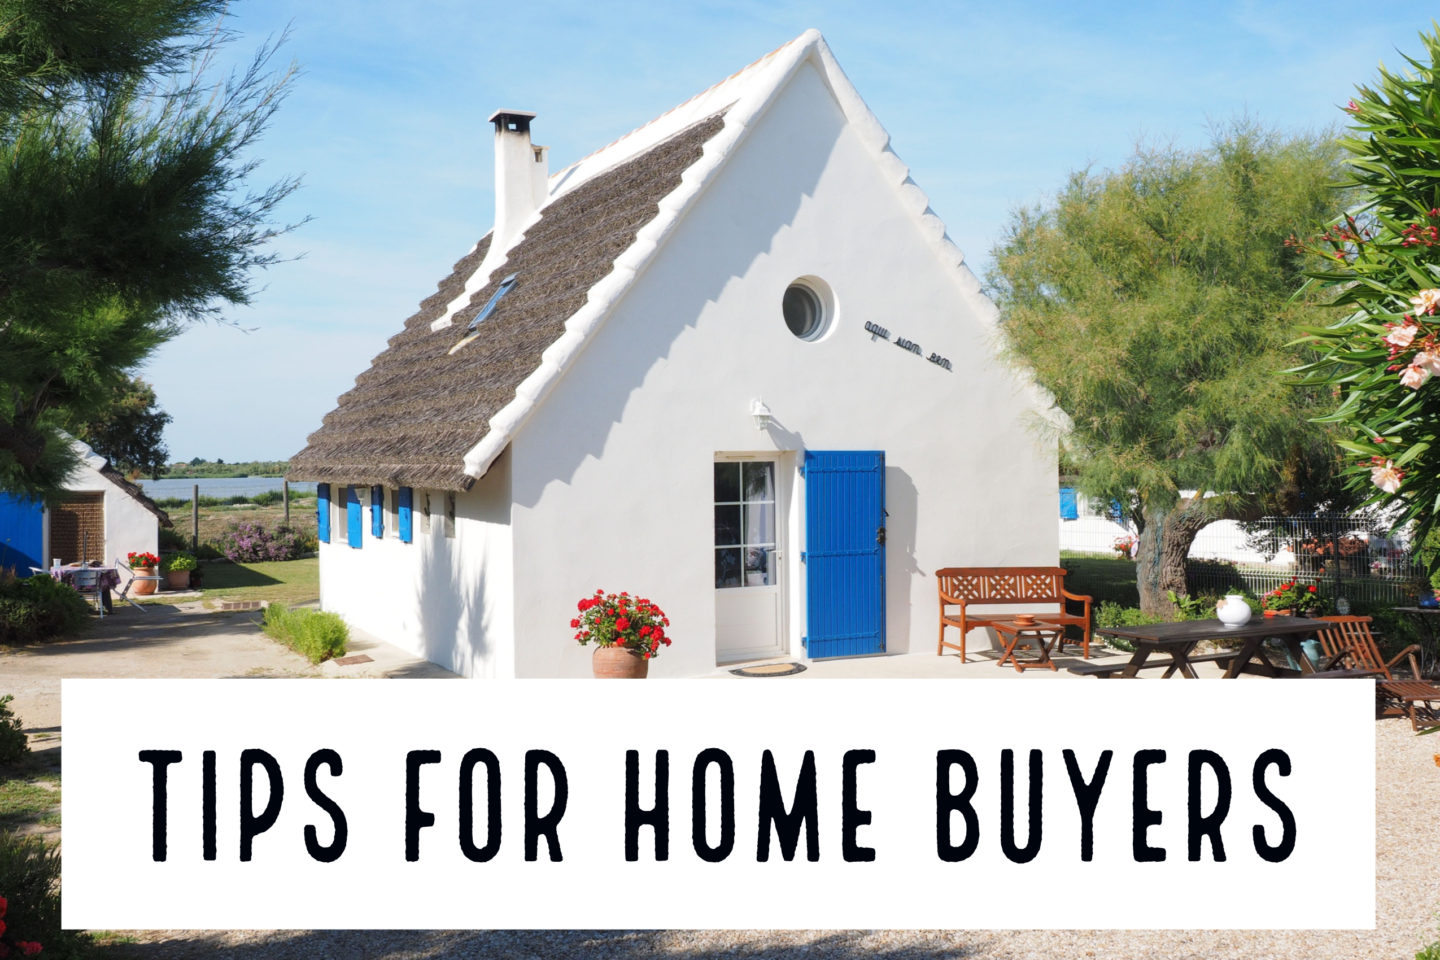 Moving House // Home Buying Myths You Shouldn’t Believe